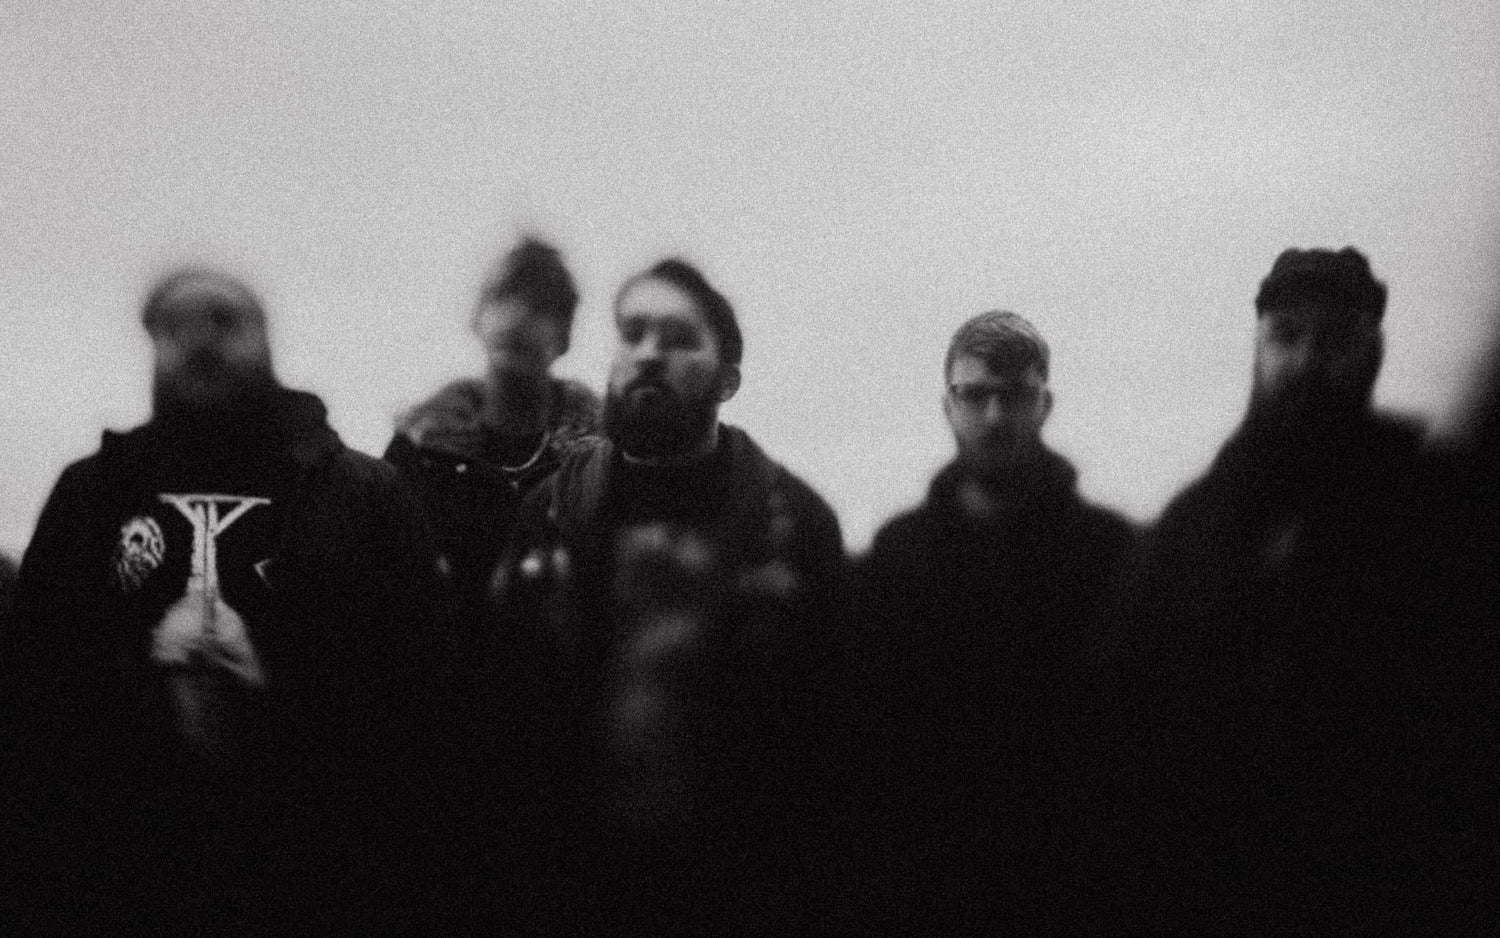 Underdark Add Their Voice to Black Metal's Masses with 'Our Bodies Burned Bright On Re-Entry'